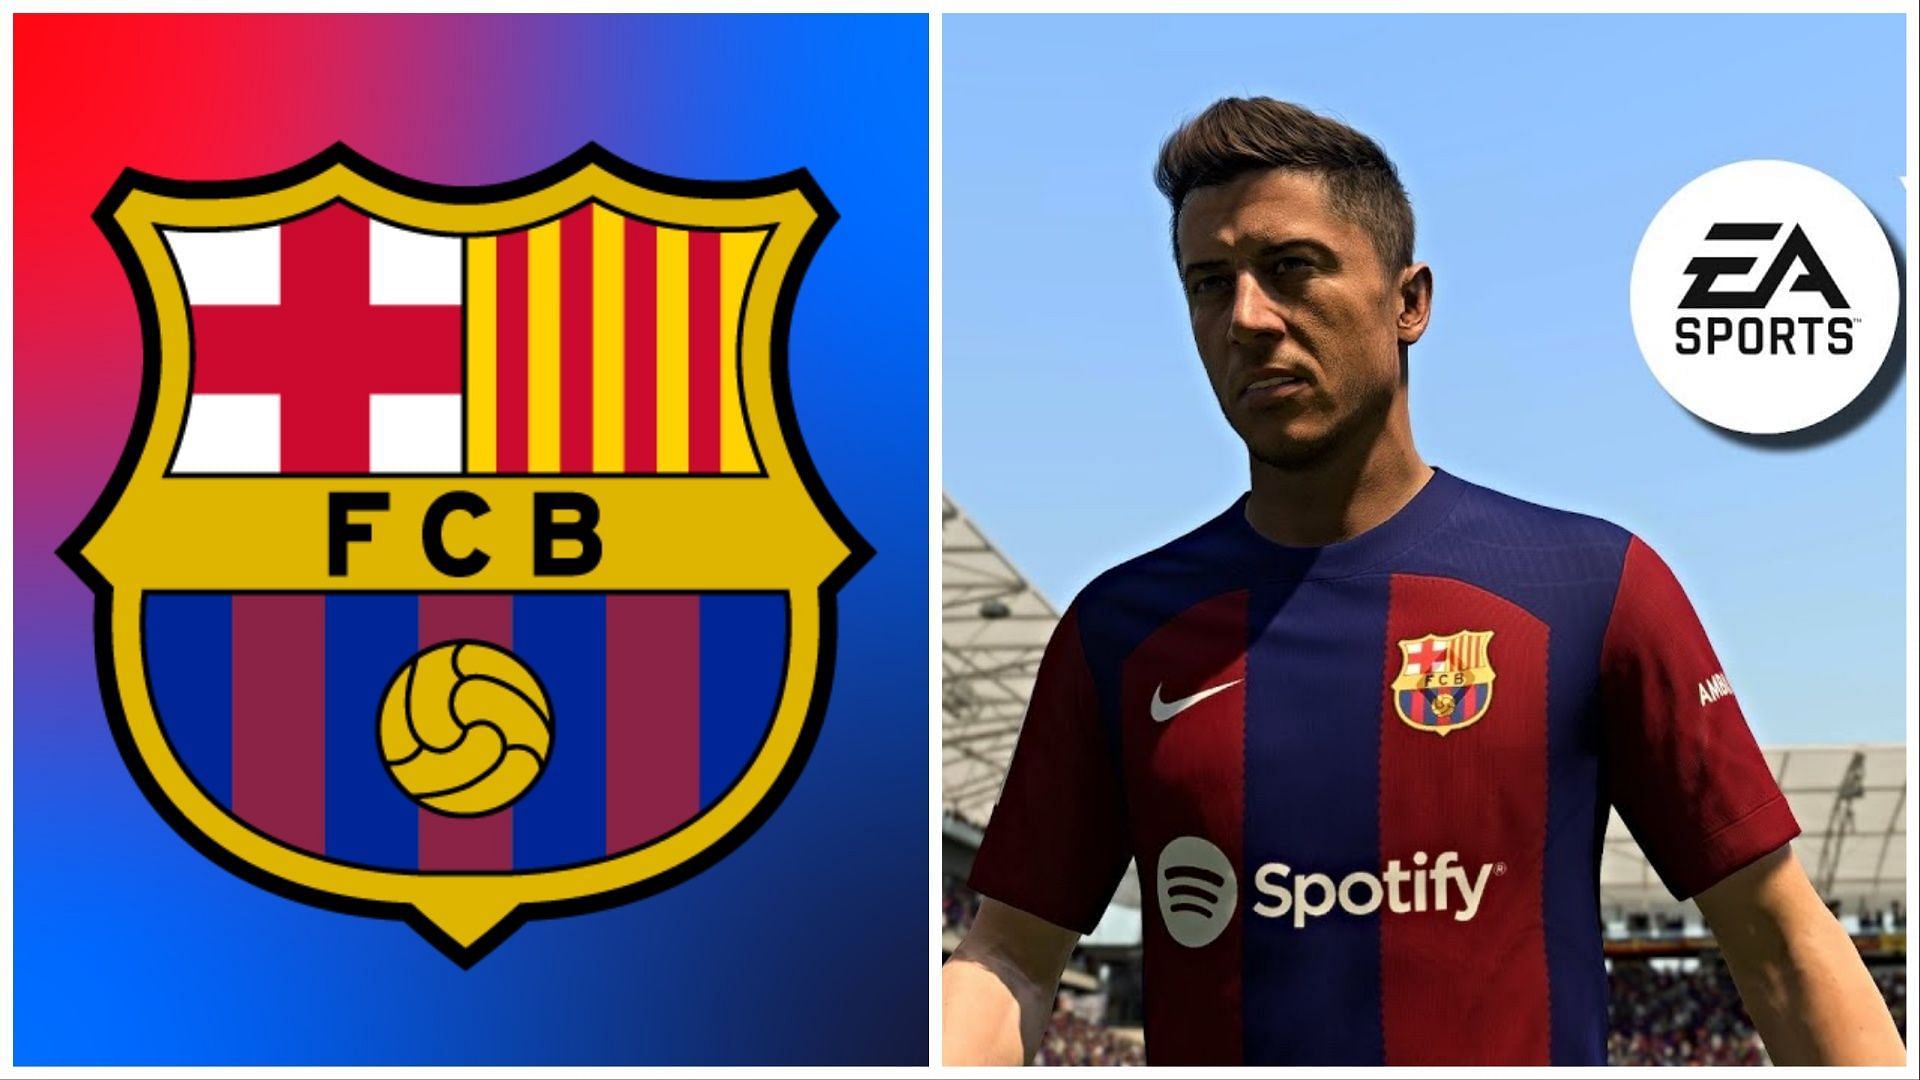 FC Barcelona are overpowered in EA FC 24 (Images via FC Barcelona and EA Sports)